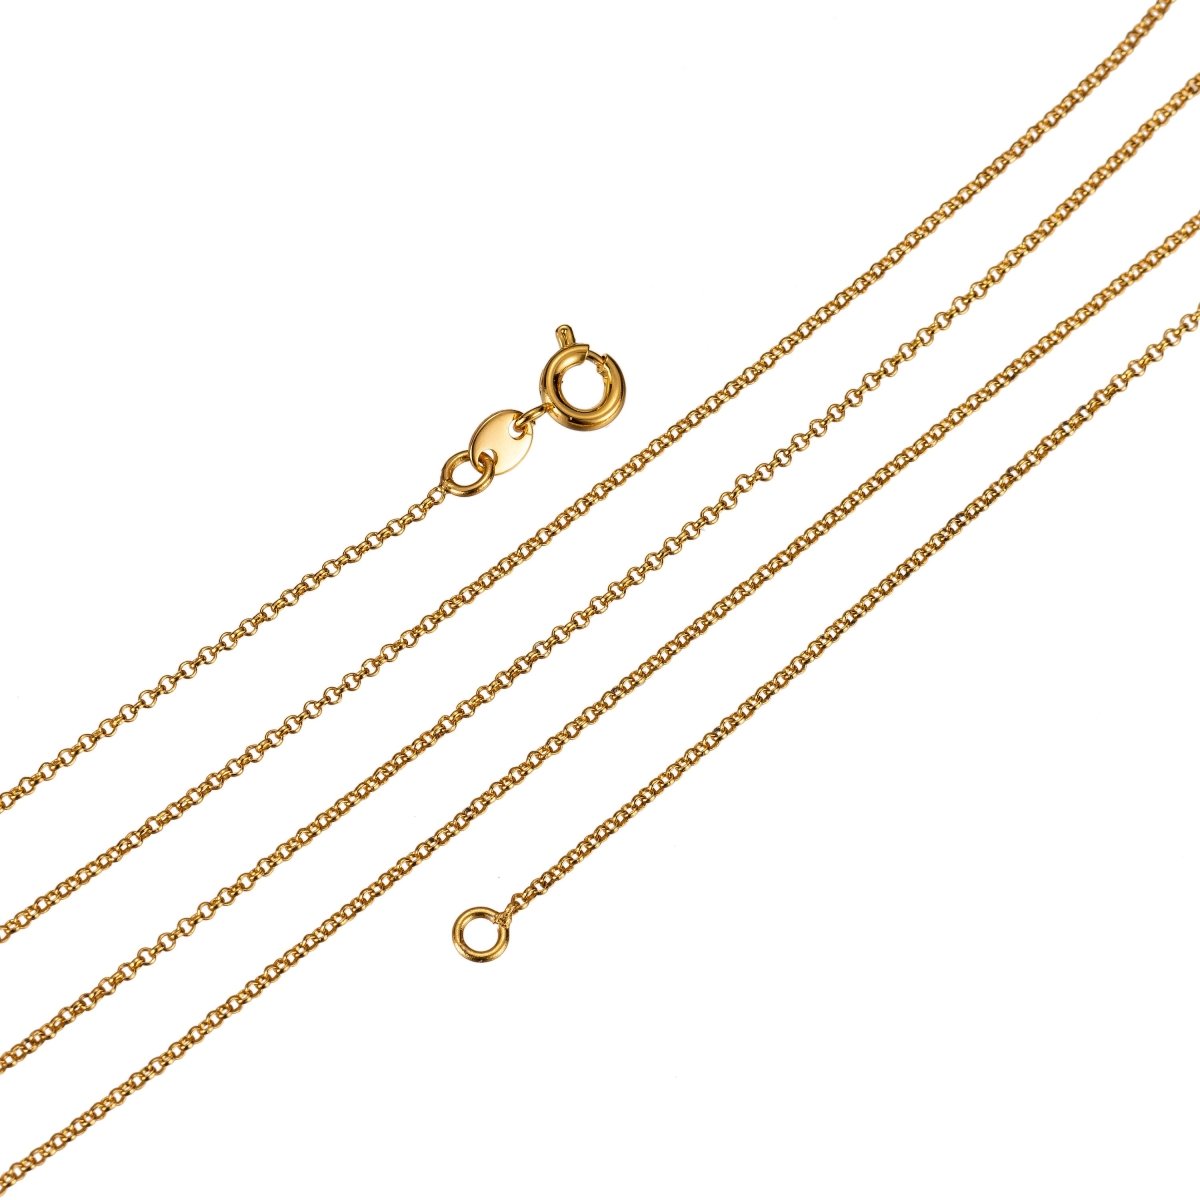 Dainty 24k Gold Filled 1mm Rolo Finished Chain 23.5 inch for Long Necklace Making Small Simple Minimalist Delicate Chain Necklace | CN-425 Clearance Pricing - DLUXCA